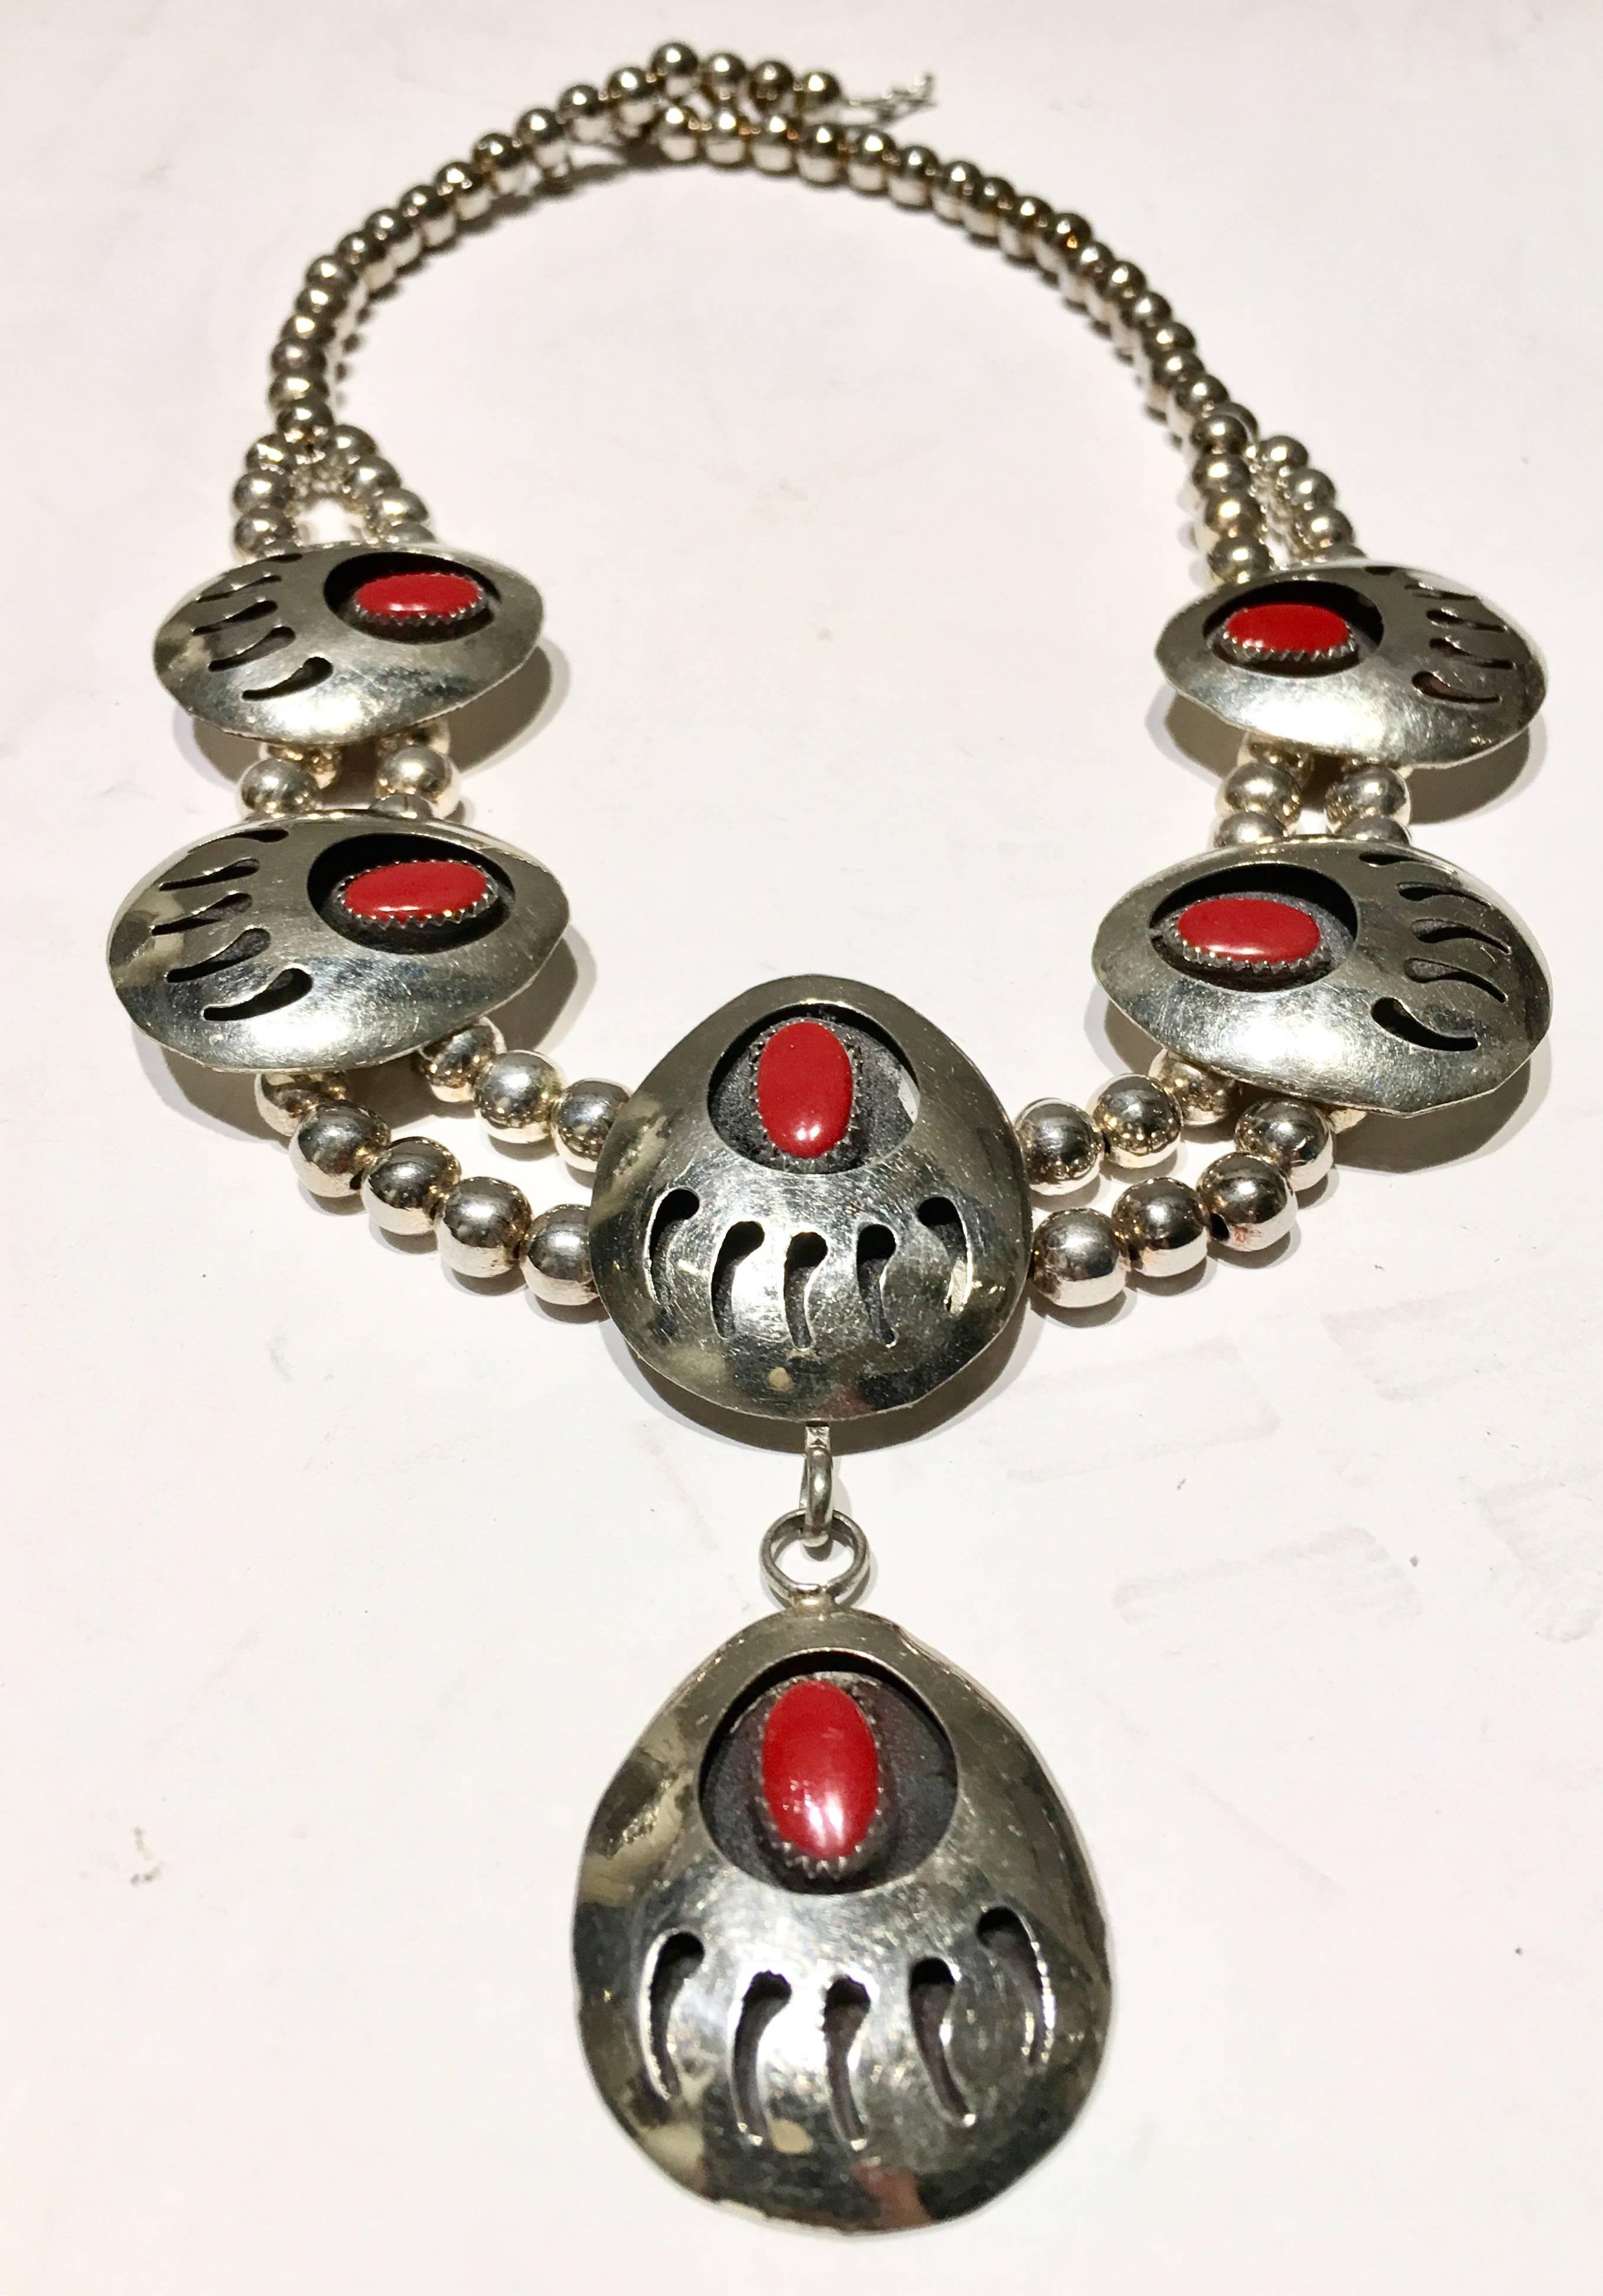 Vintage Native American style sterling silver and coral bear claw disc squash blossom necklace. Necklace features six discs in total. Each piece of coral is approximately 0.50